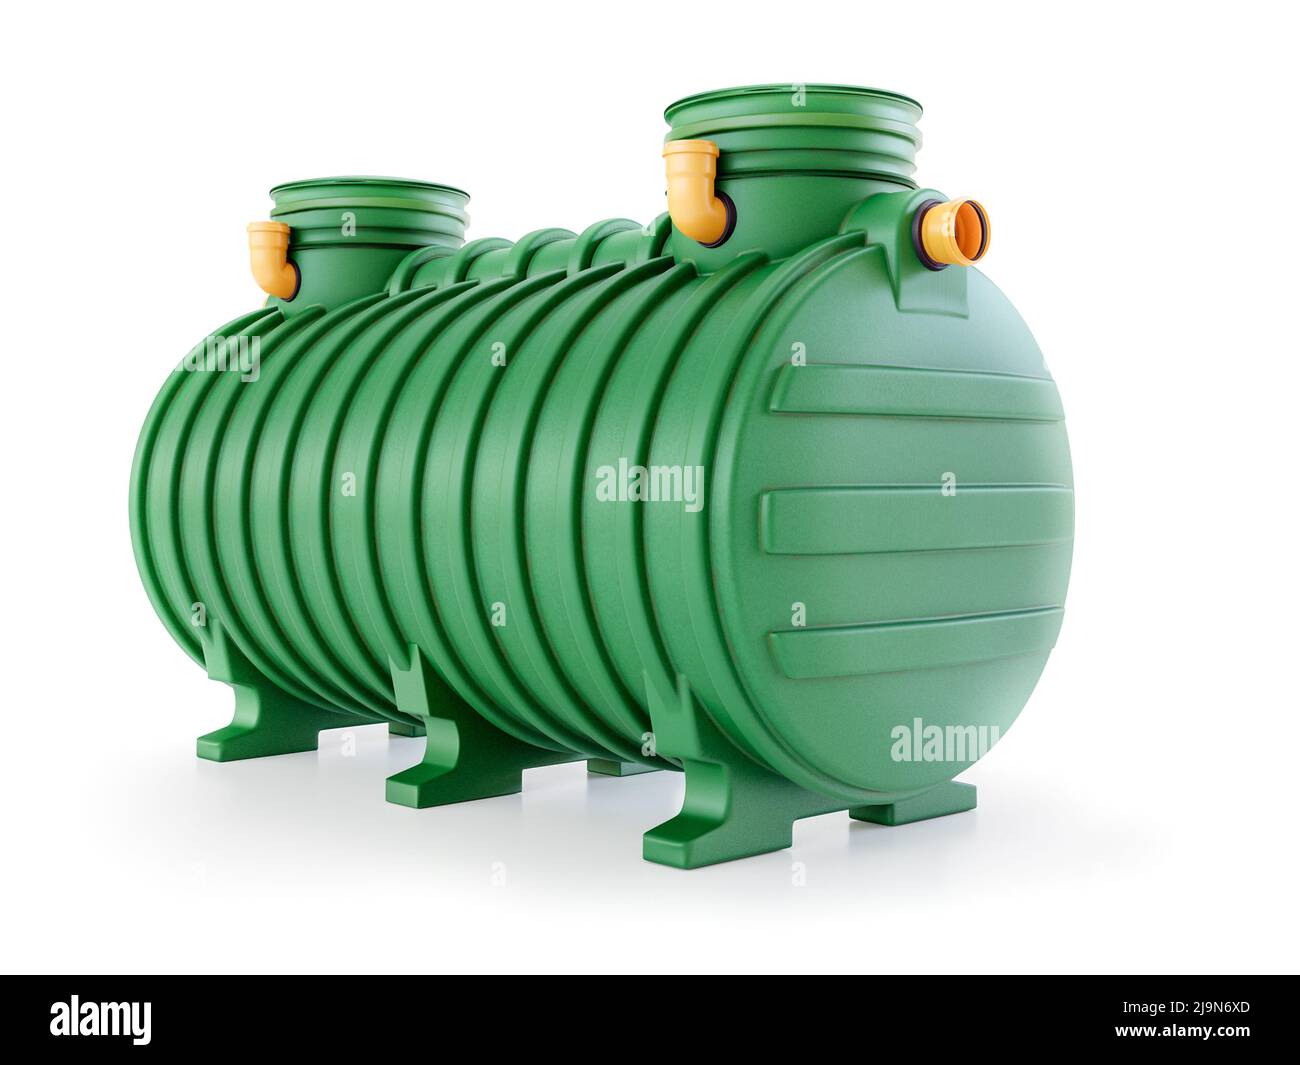 3d rendering of household green plastic two-chamber septic tank on white background Stock Photo